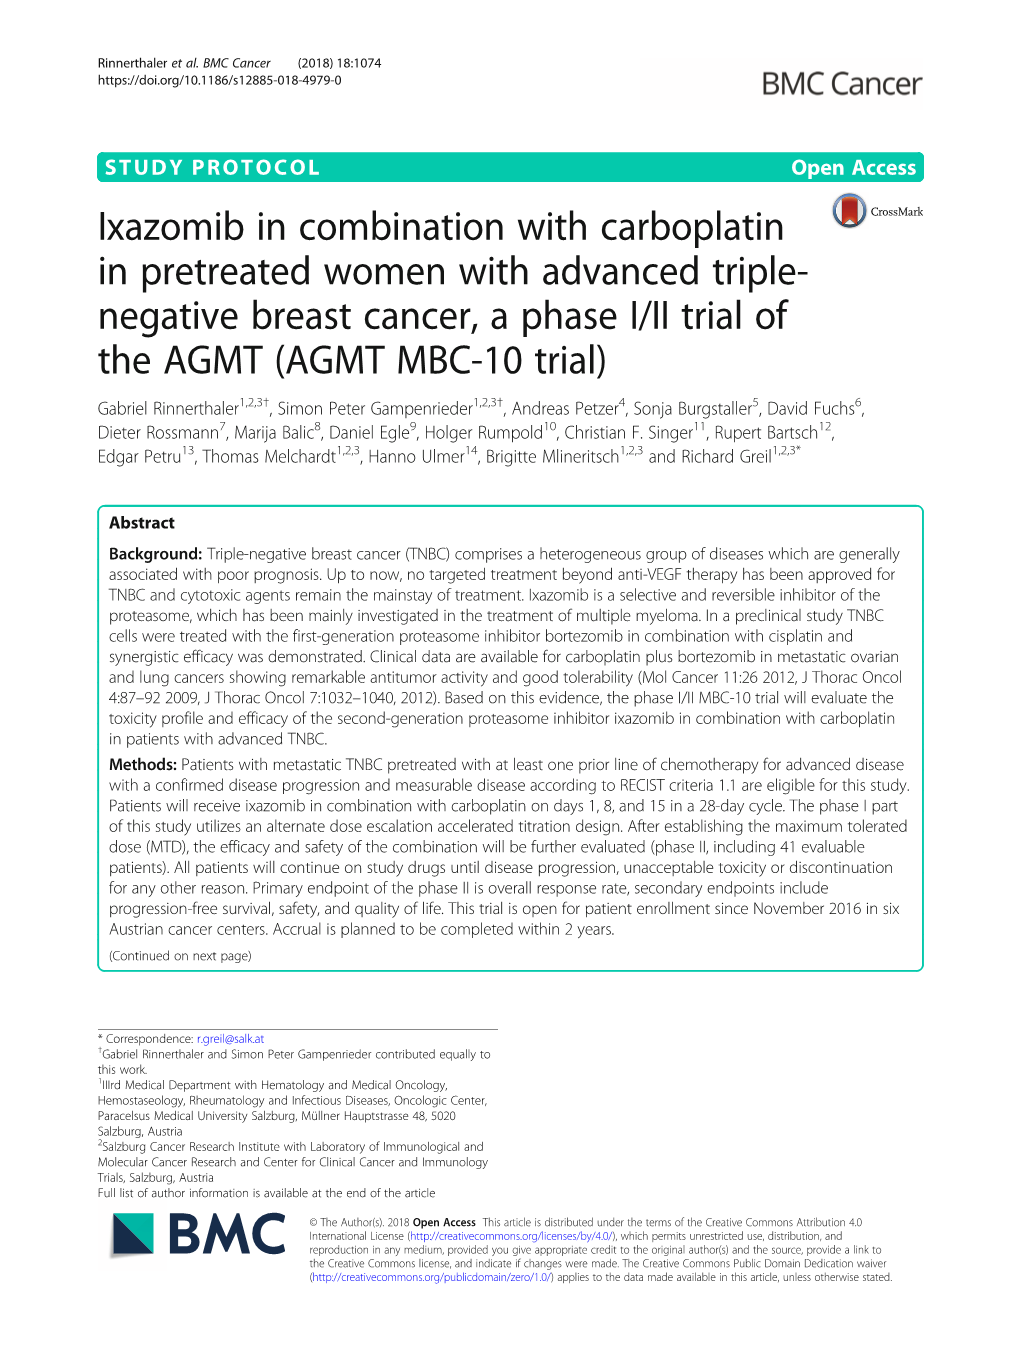 Ixazomib in Combination with Carboplatin in Pretreated Women